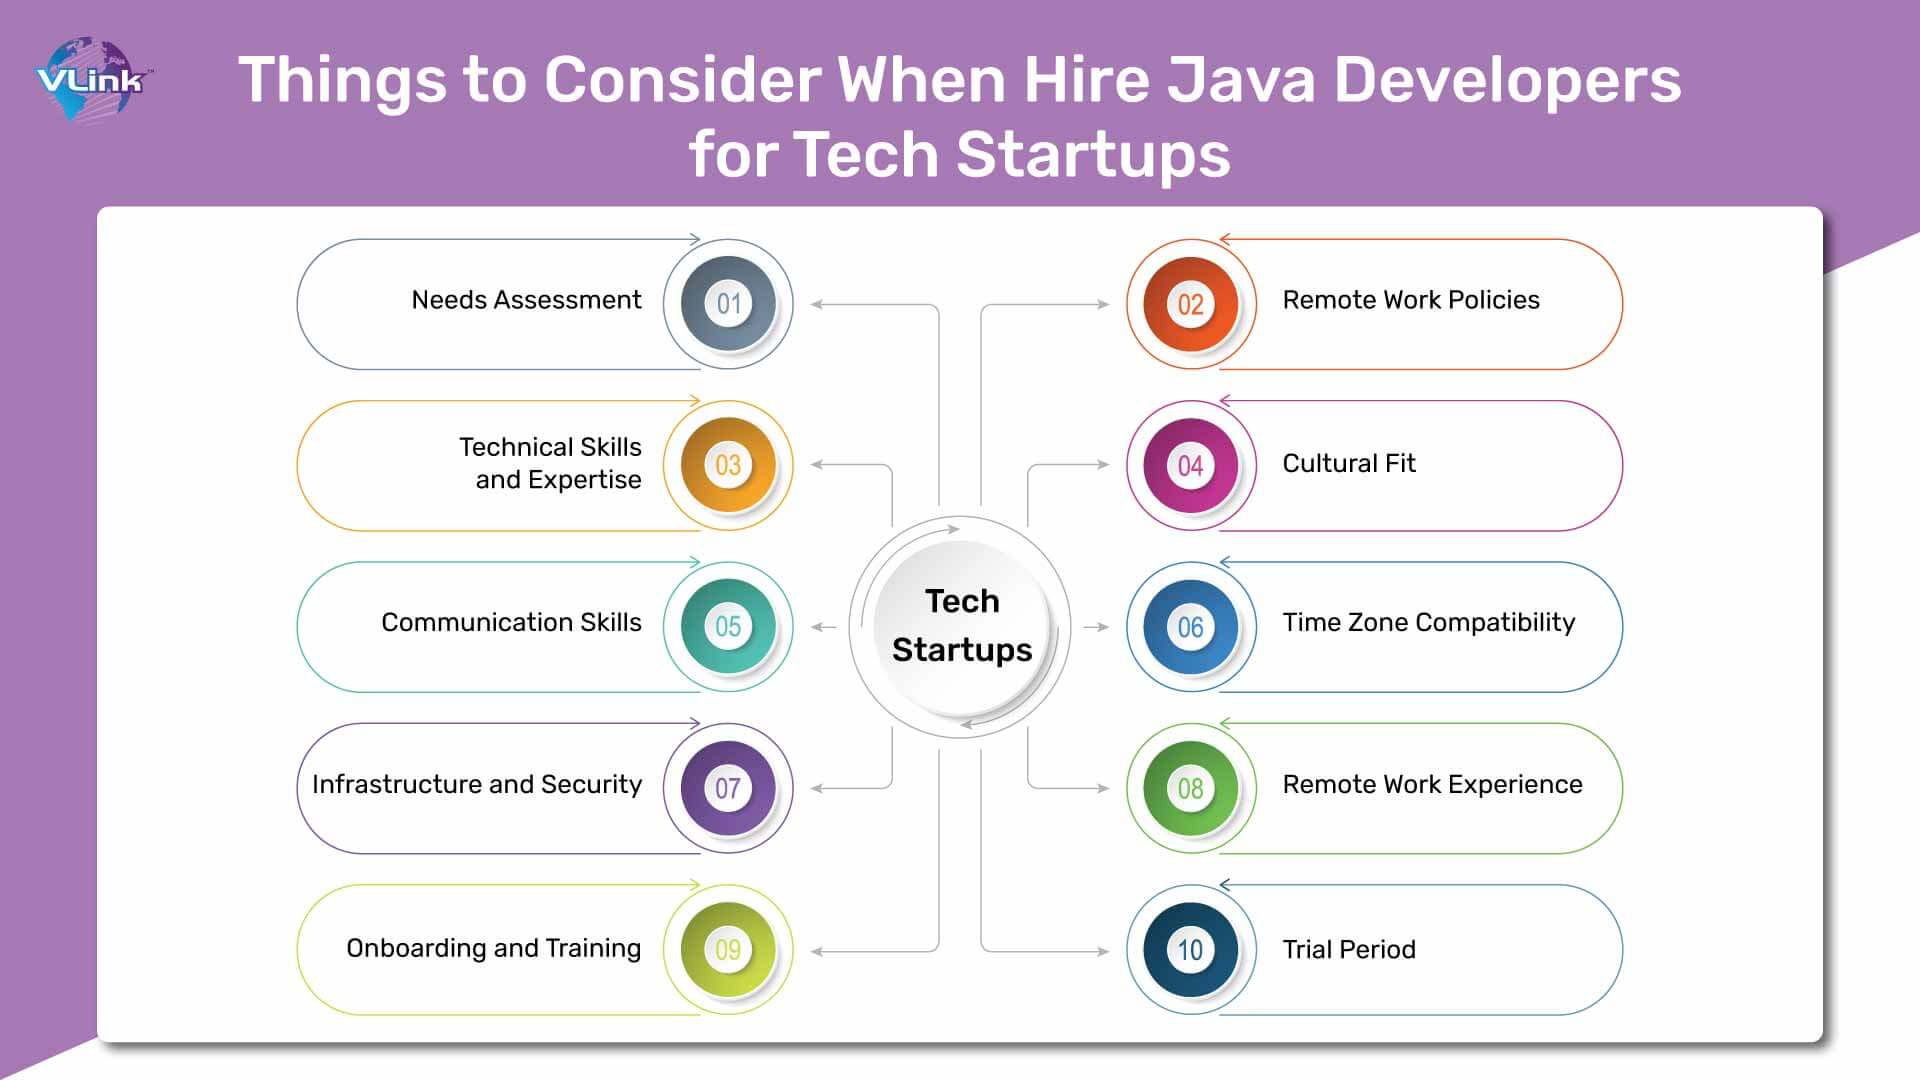 Things to Consider When Hiring Java Developers for Tech Startup